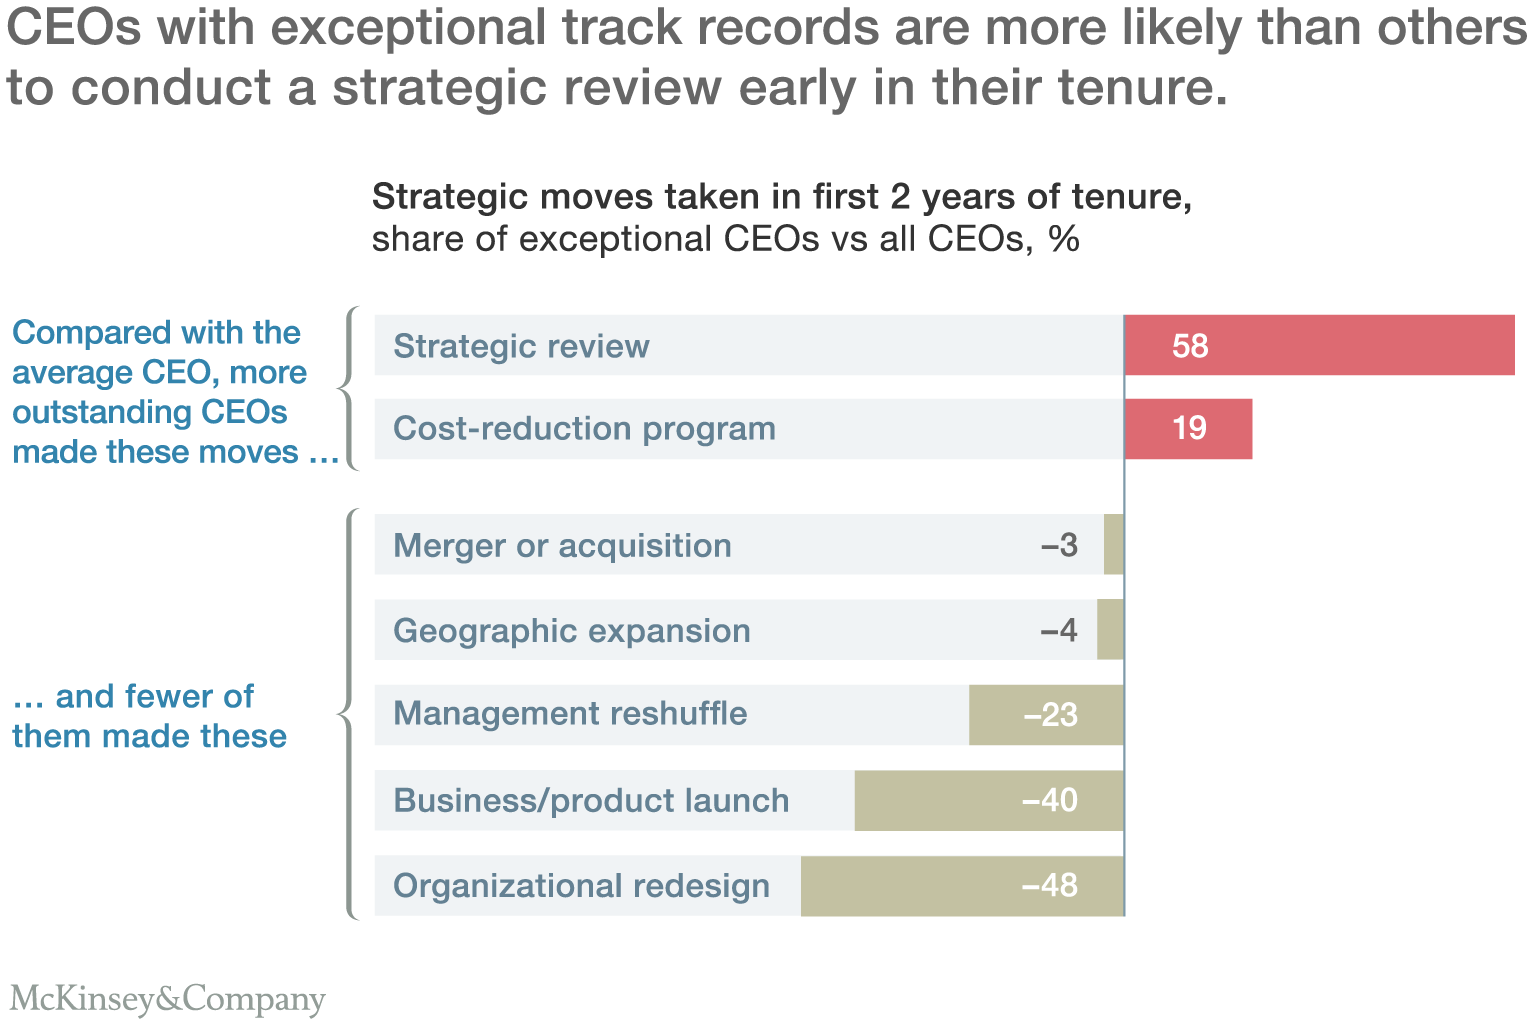 CEOs with exceptional track records are more likely than others to conduct a strategic review early in their tenure.